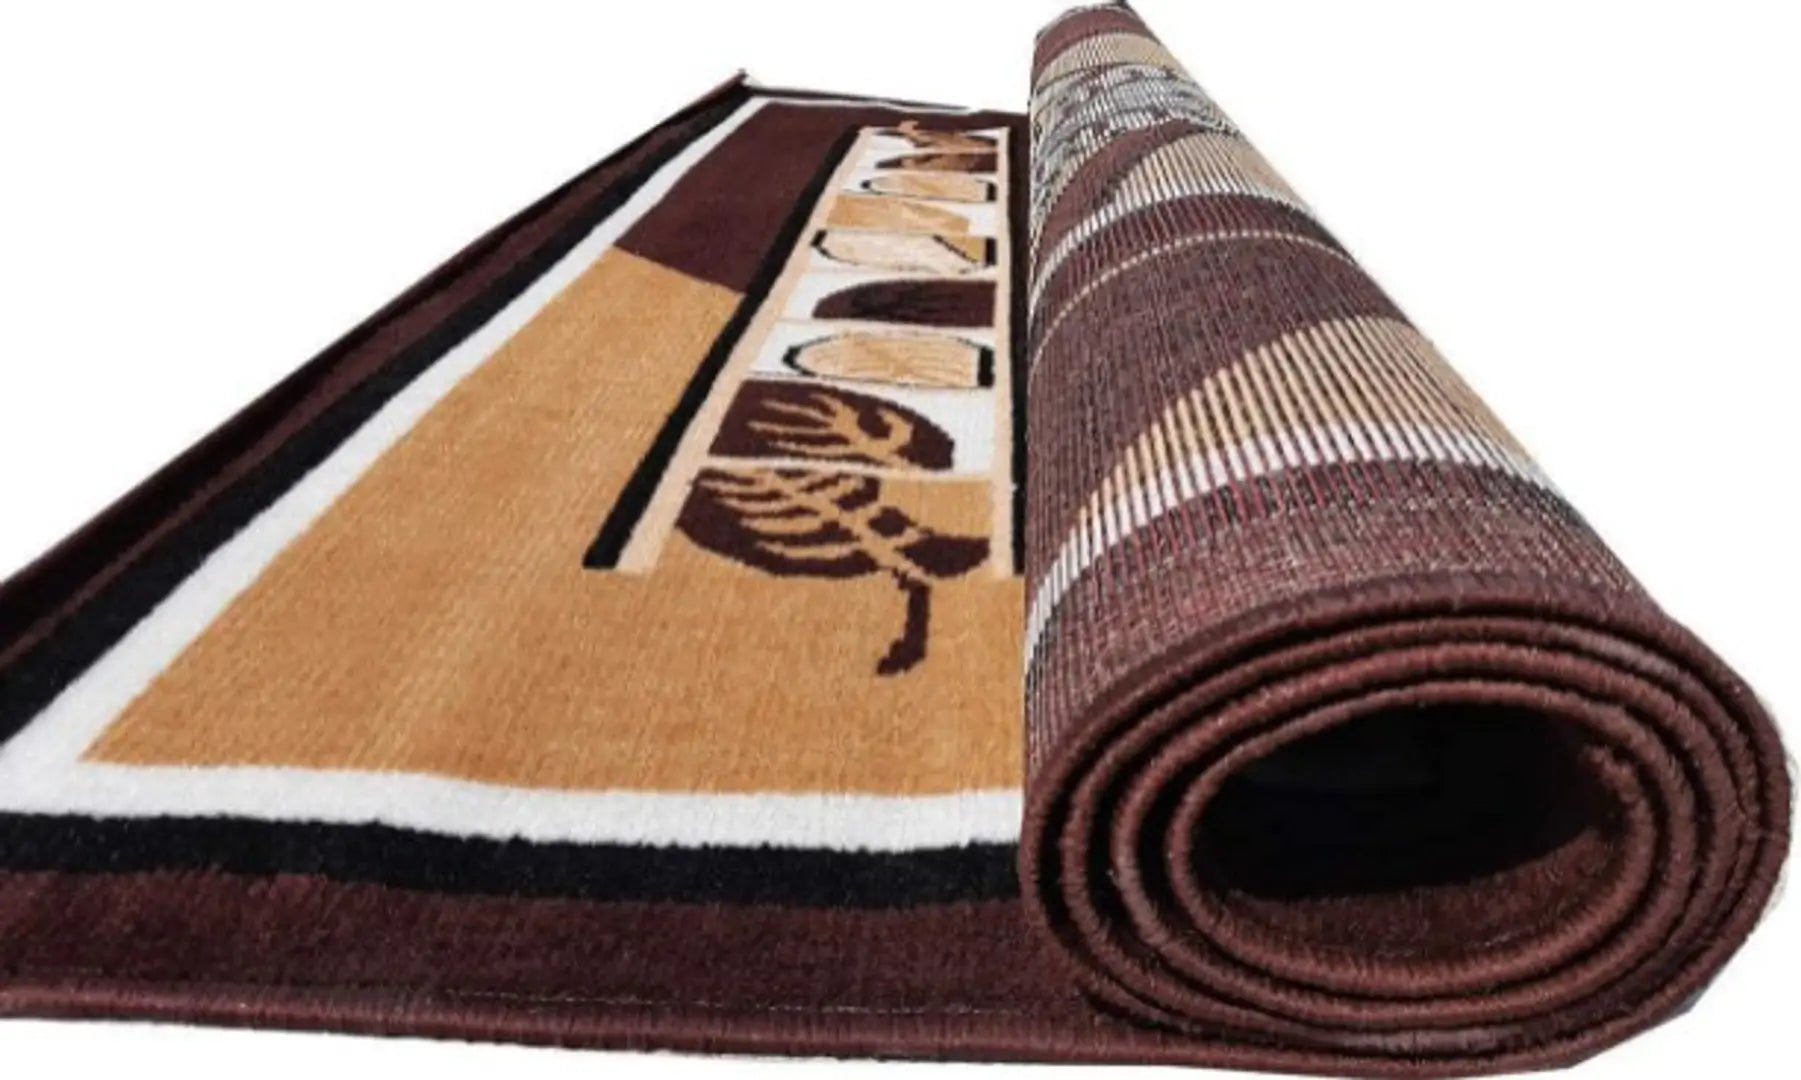 SUPER CARPETS PREMIUM QUALITY LIGHT WEIGHT CARPET WITH 5 TO 6 MM THICKNESS RUG